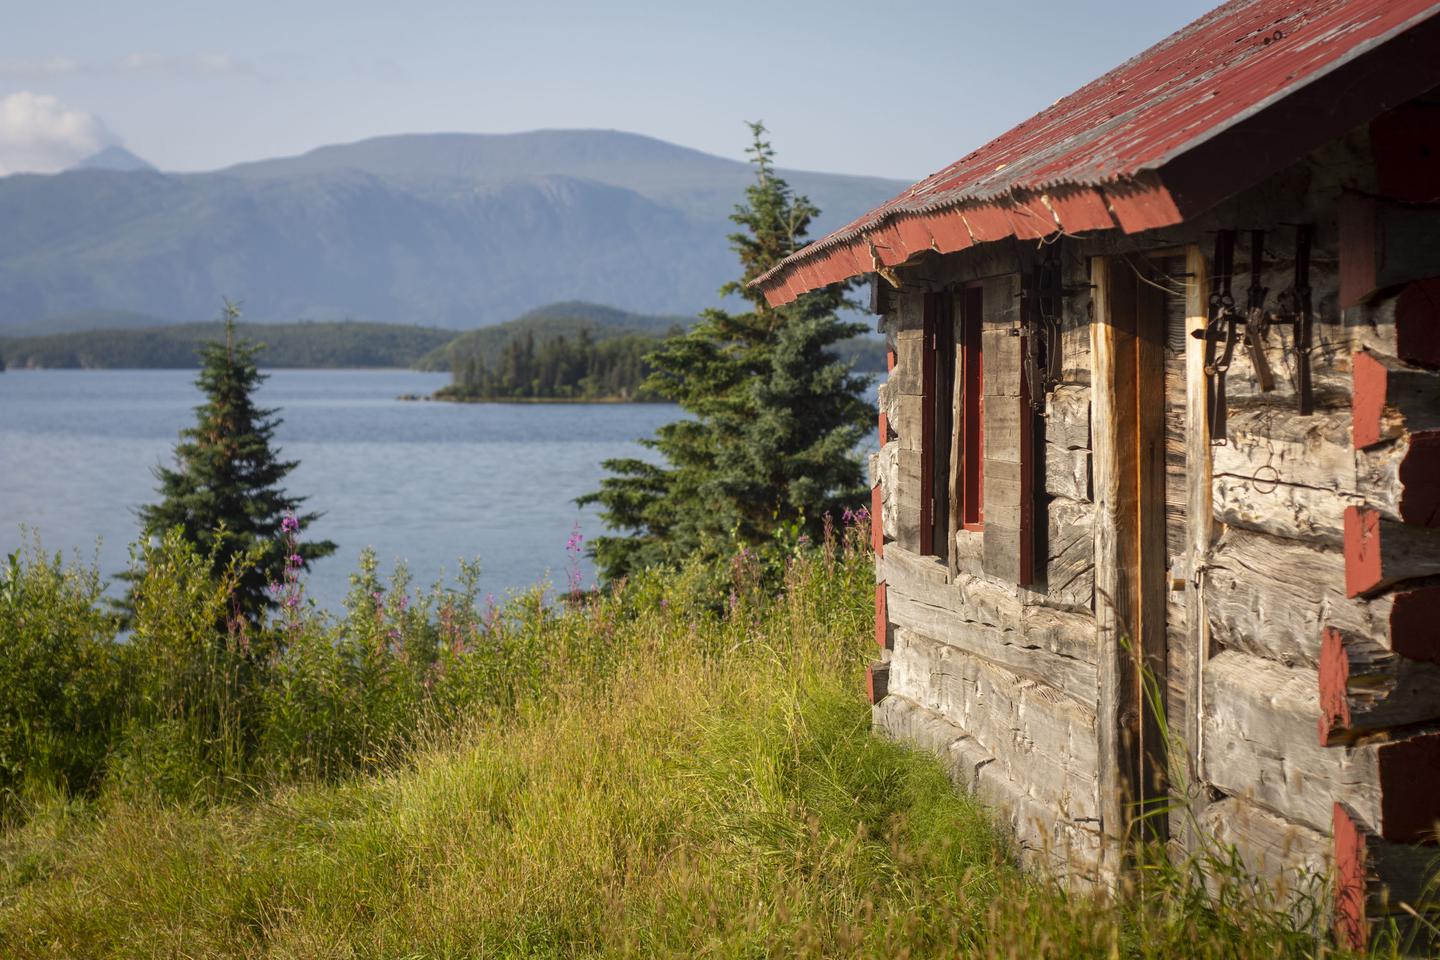 A wood cabin bathed in sunlight sits on a grassy field next to a lake surrounded by mountains.Fure's Cabin sits in a clearing in the Bay of Islands on Naknek Lake.